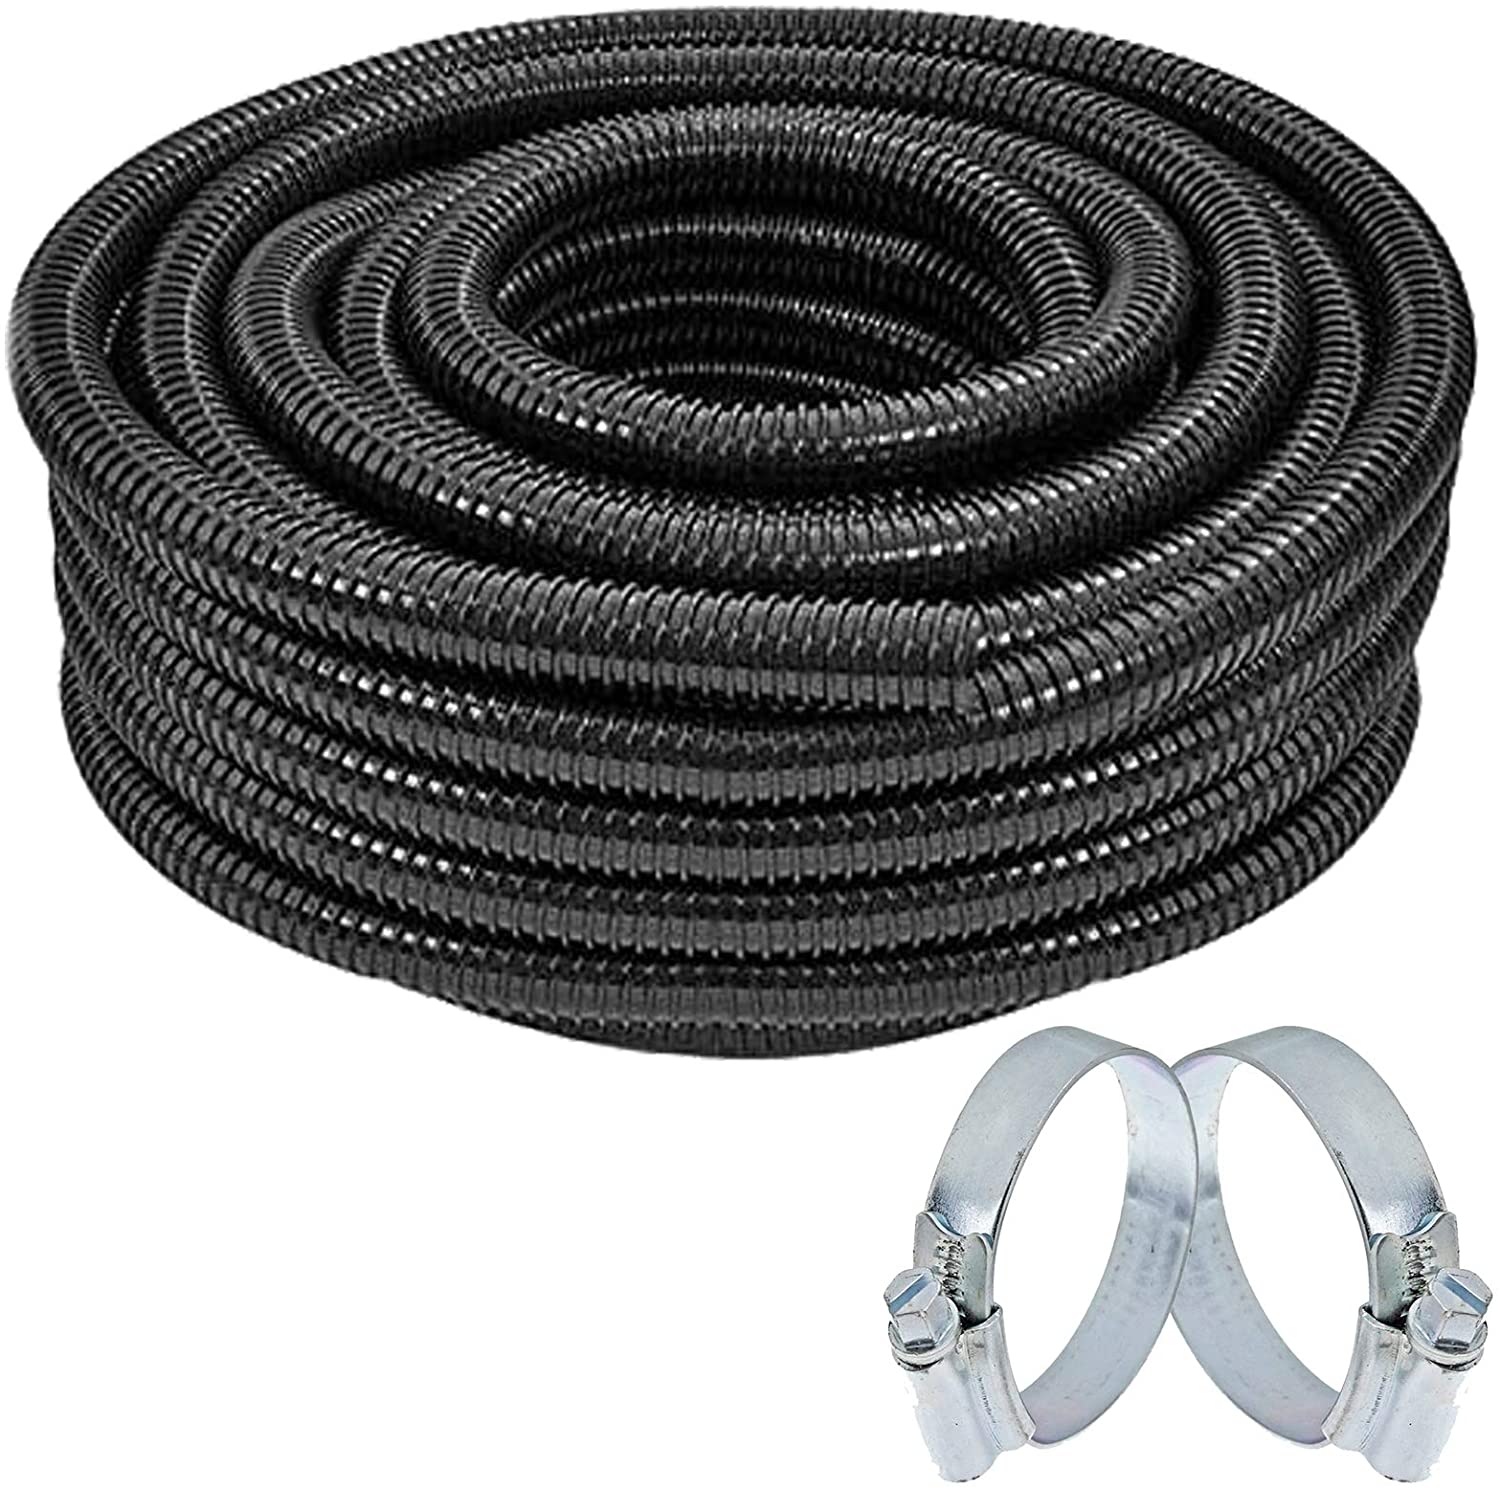 Universal Hose Pipe Water Butt Extension Overflow Connector + 2 Clamp Clips (25mm, 5m)